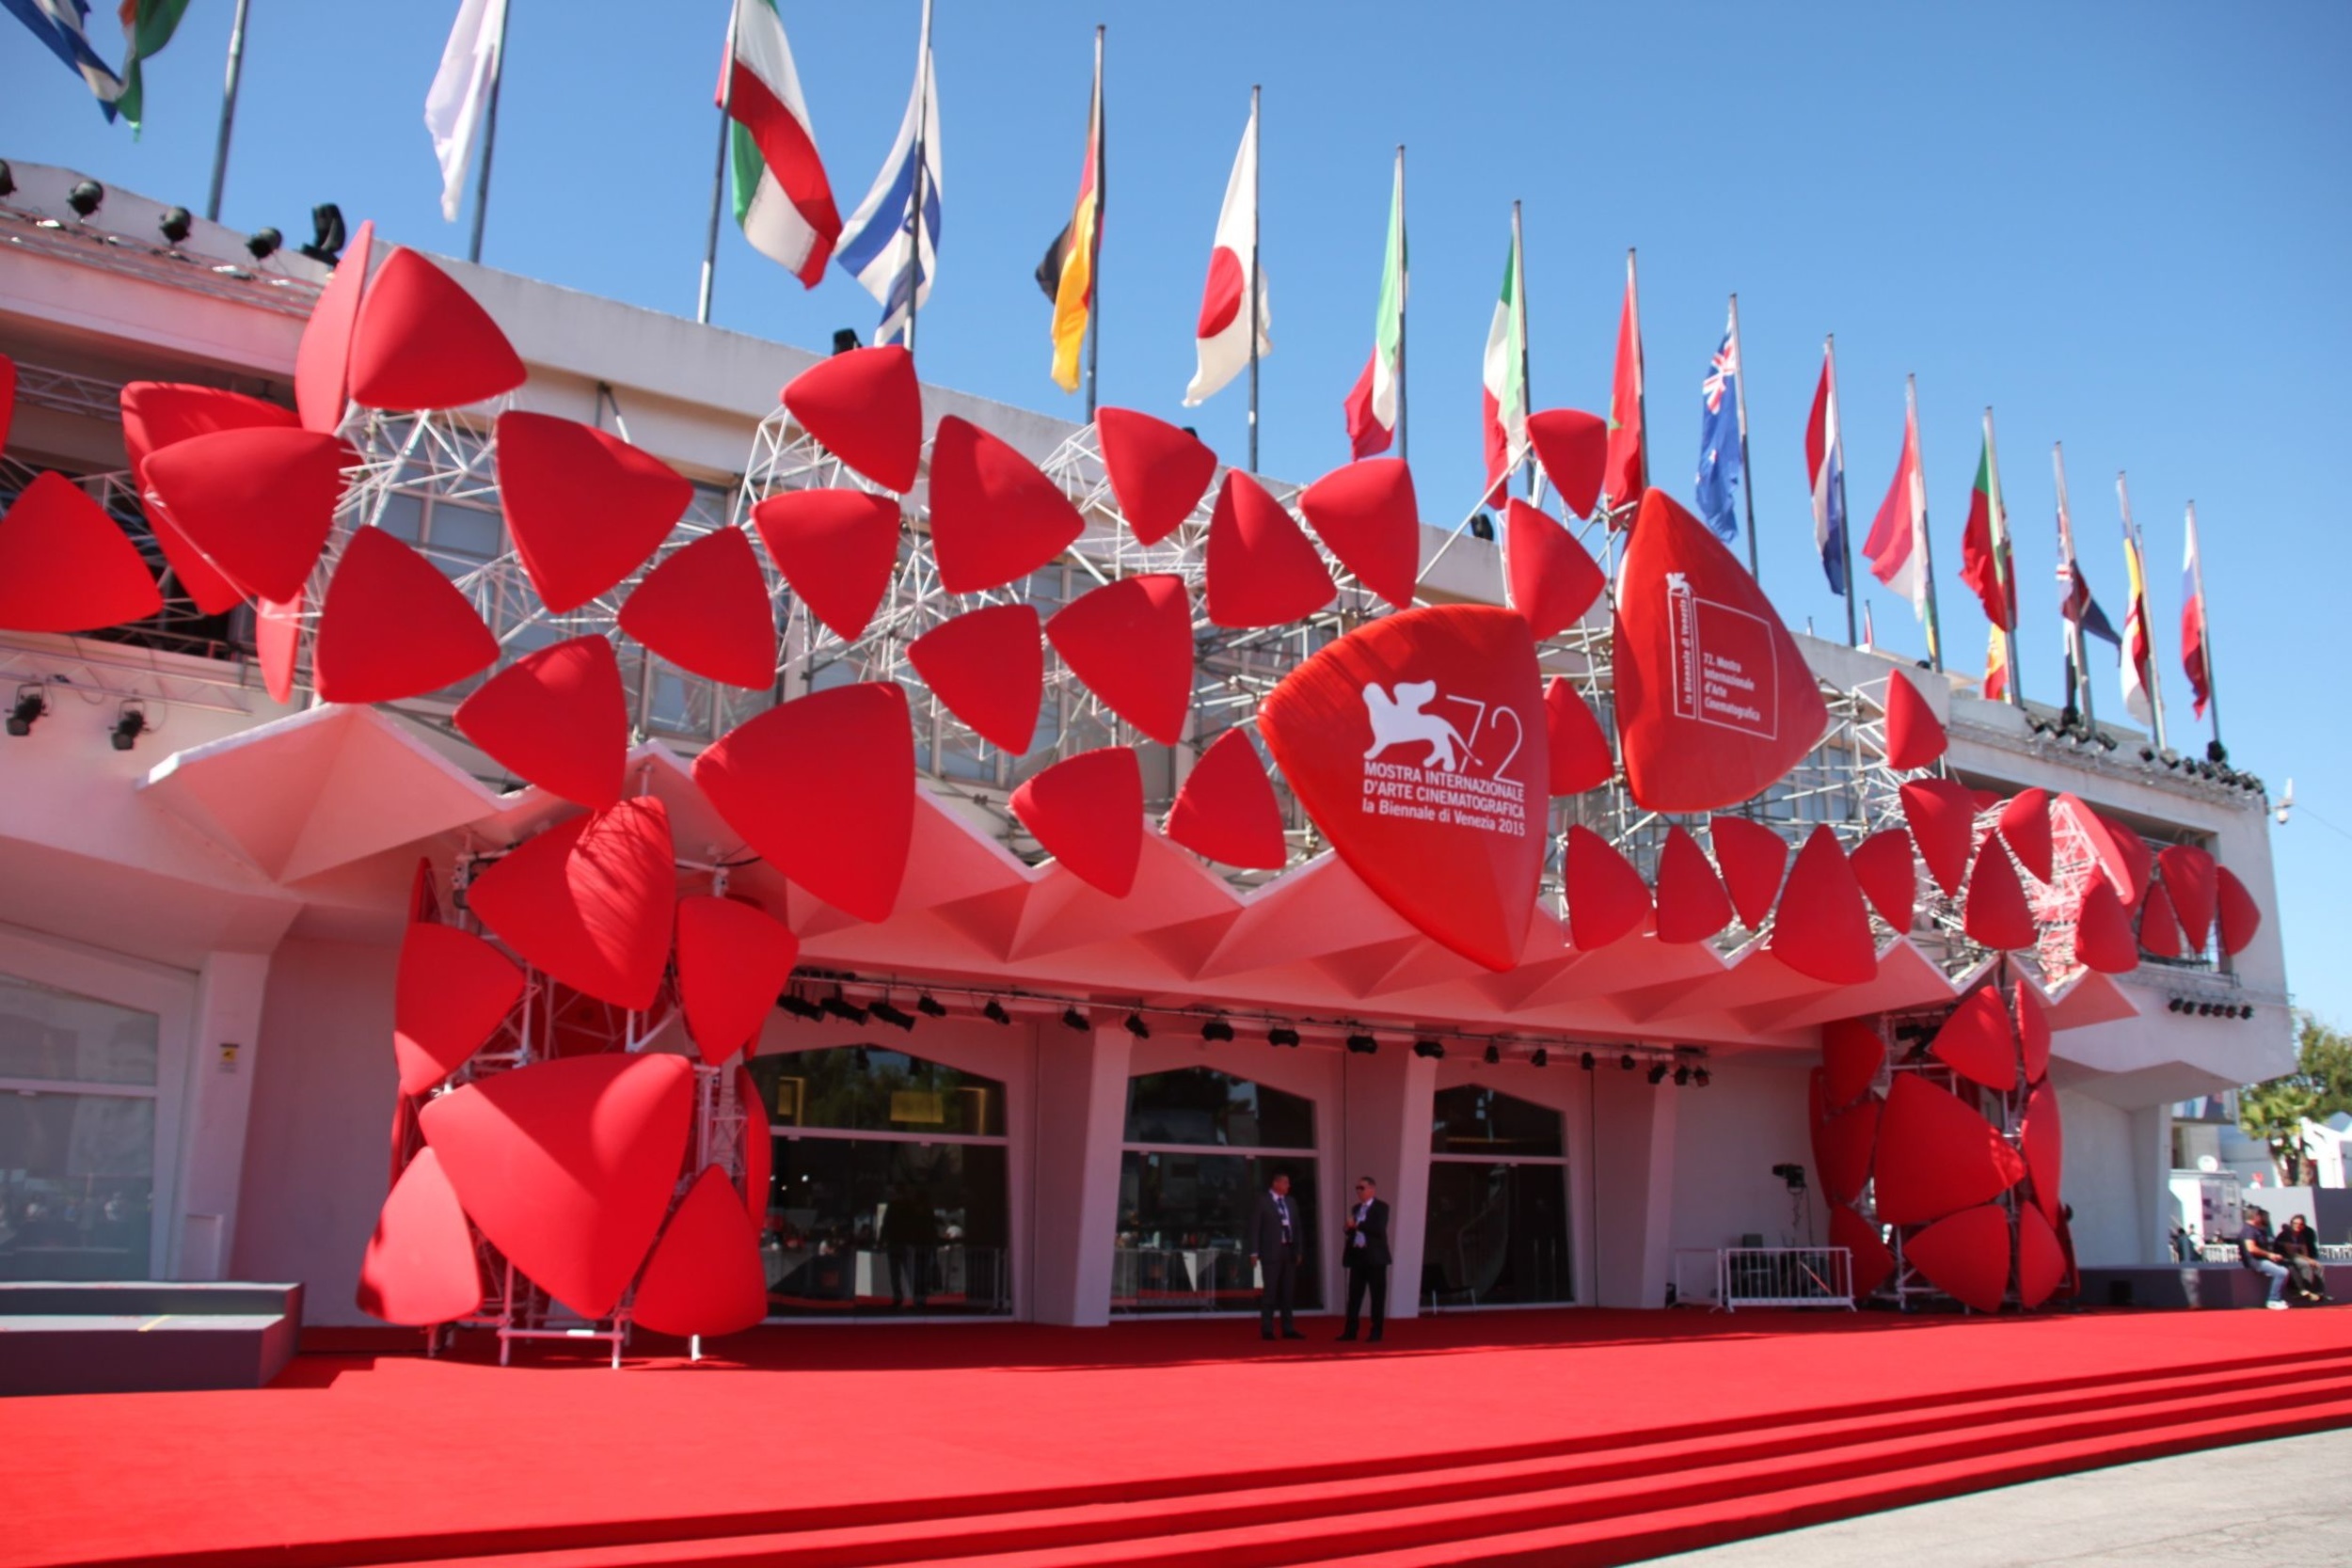 <p>Speaking of the Lido, when the Venice Film Festival hits town every September, there's no better place to be. Pro tip: get to screenings early. Even if you have a pass, you'll need to be there a couple of hours before the film starts. </p><p>You may also like: <a href='https://www.yardbarker.com/lifestyle/articles/20_essential_organizing_tips_for_living_in_small_spaces/s1__35651417'>20 essential organizing tips for living in small spaces</a></p>